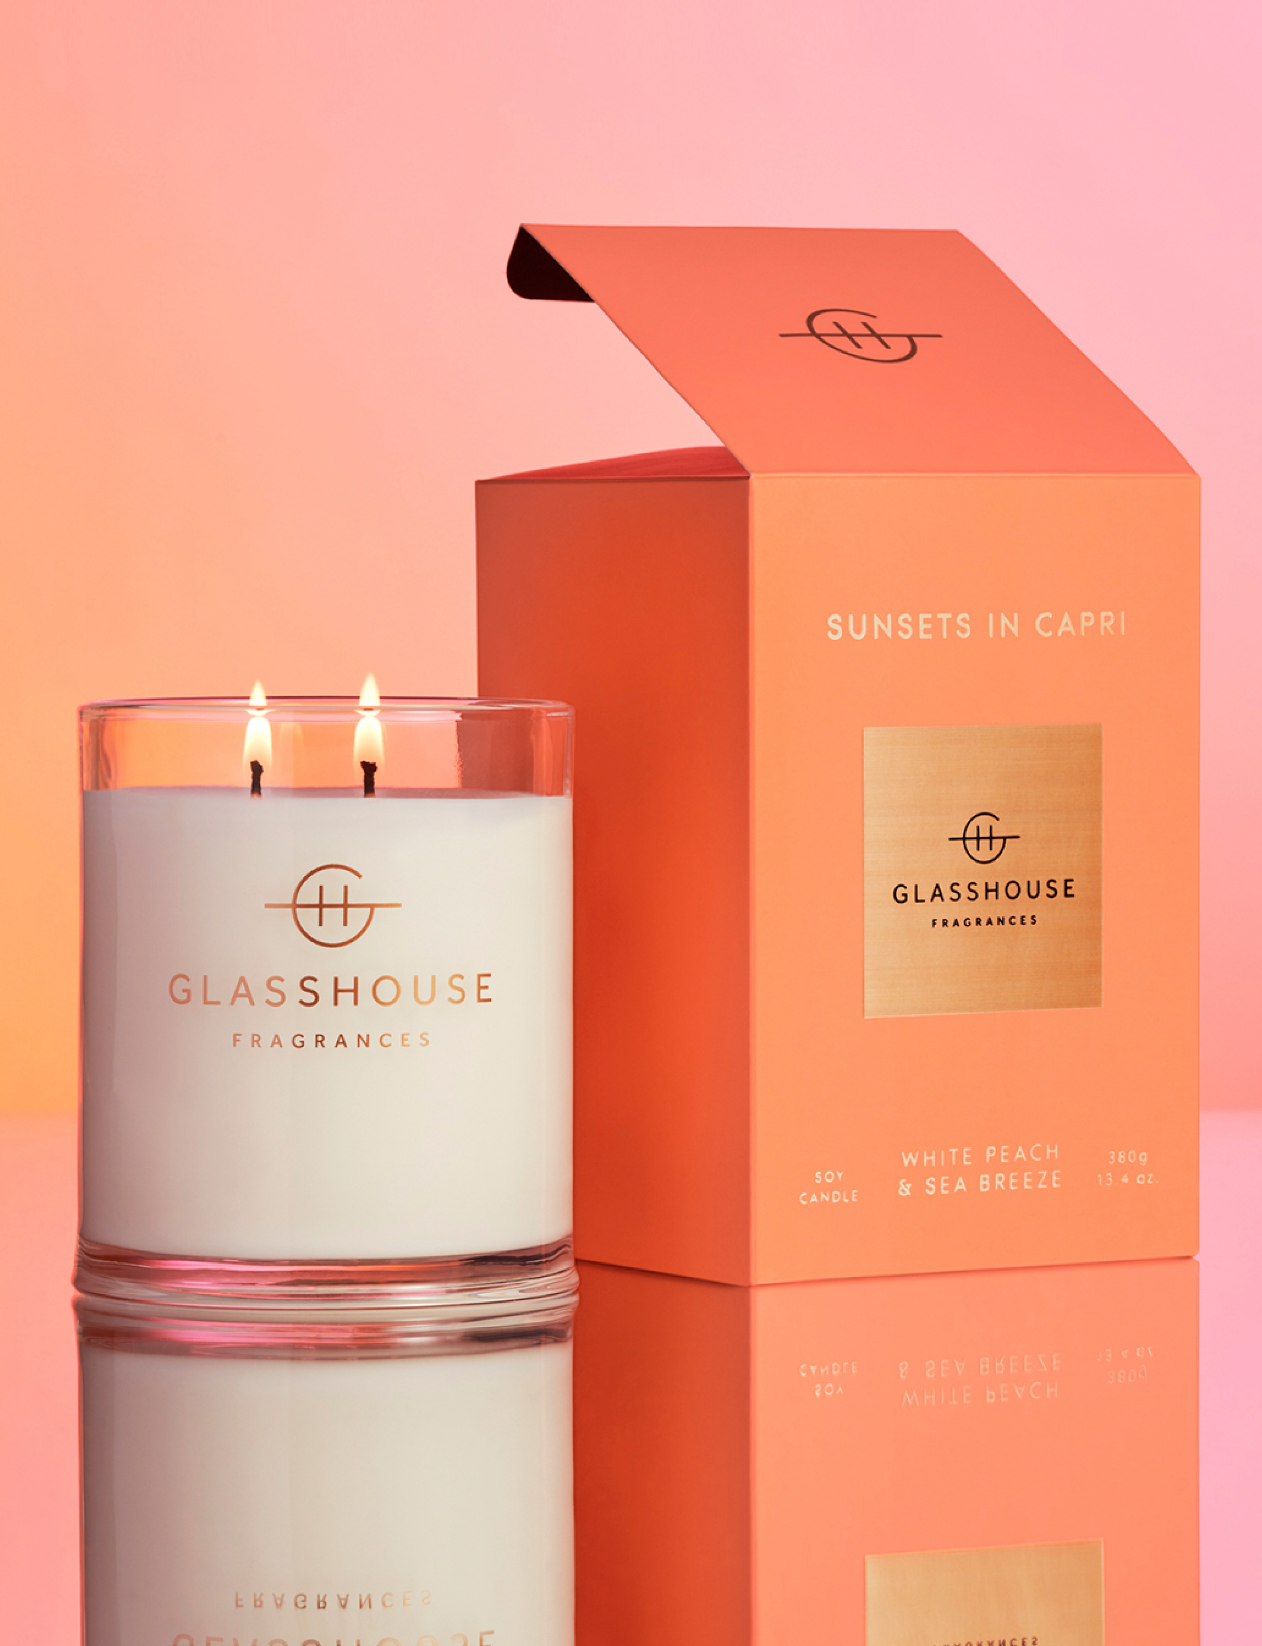 Sunsets In Capri 380g Candle